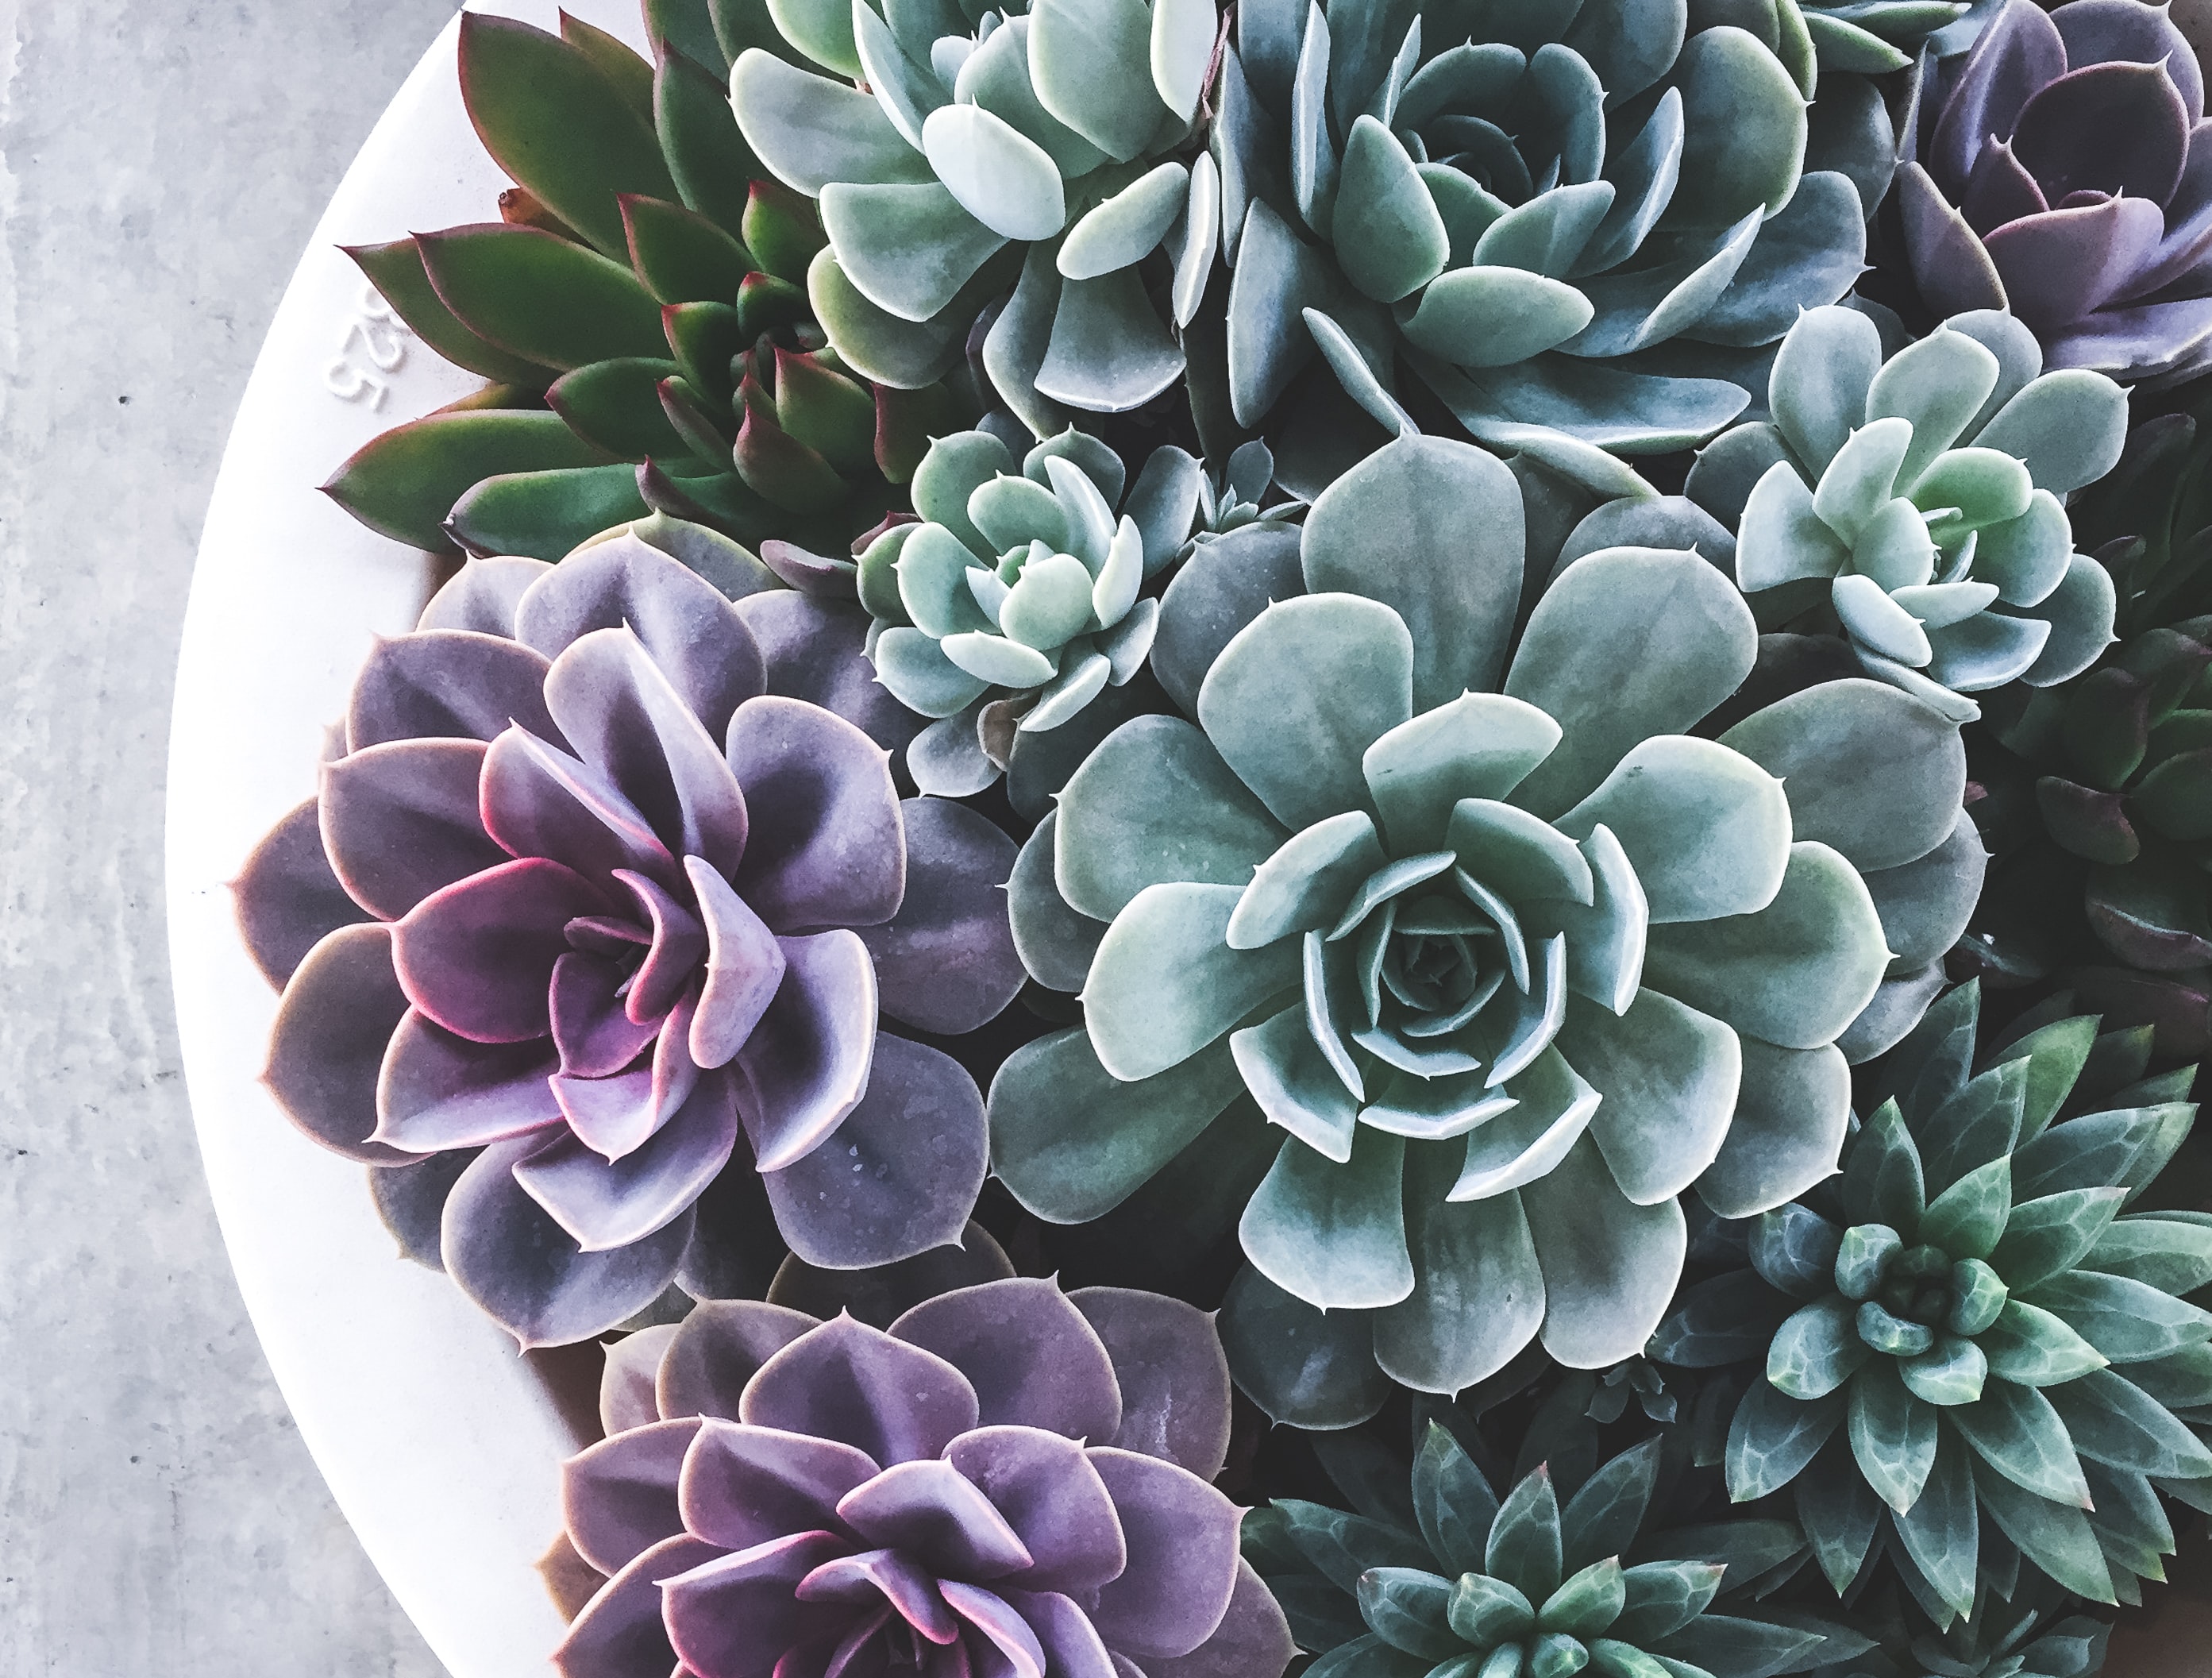 5 Houseplants You Can’t Kill's featured image